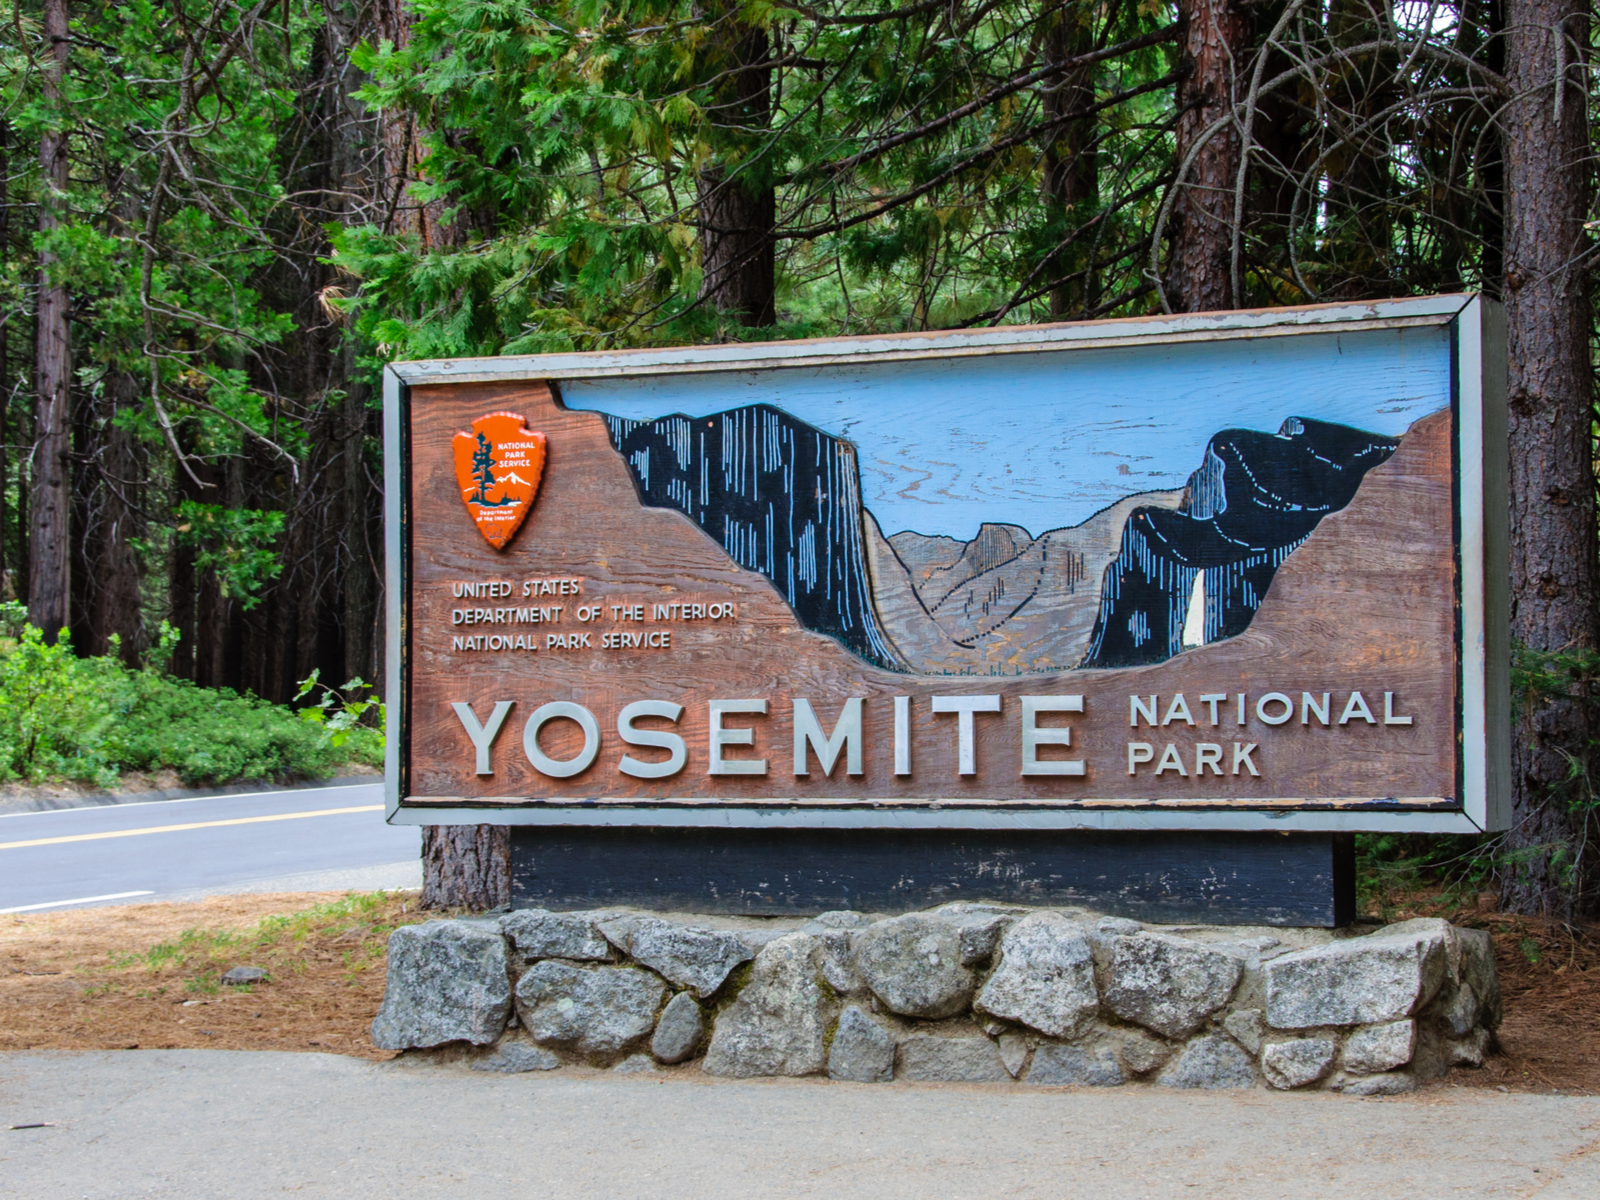 Image of the Yosemite National Park during the Summer